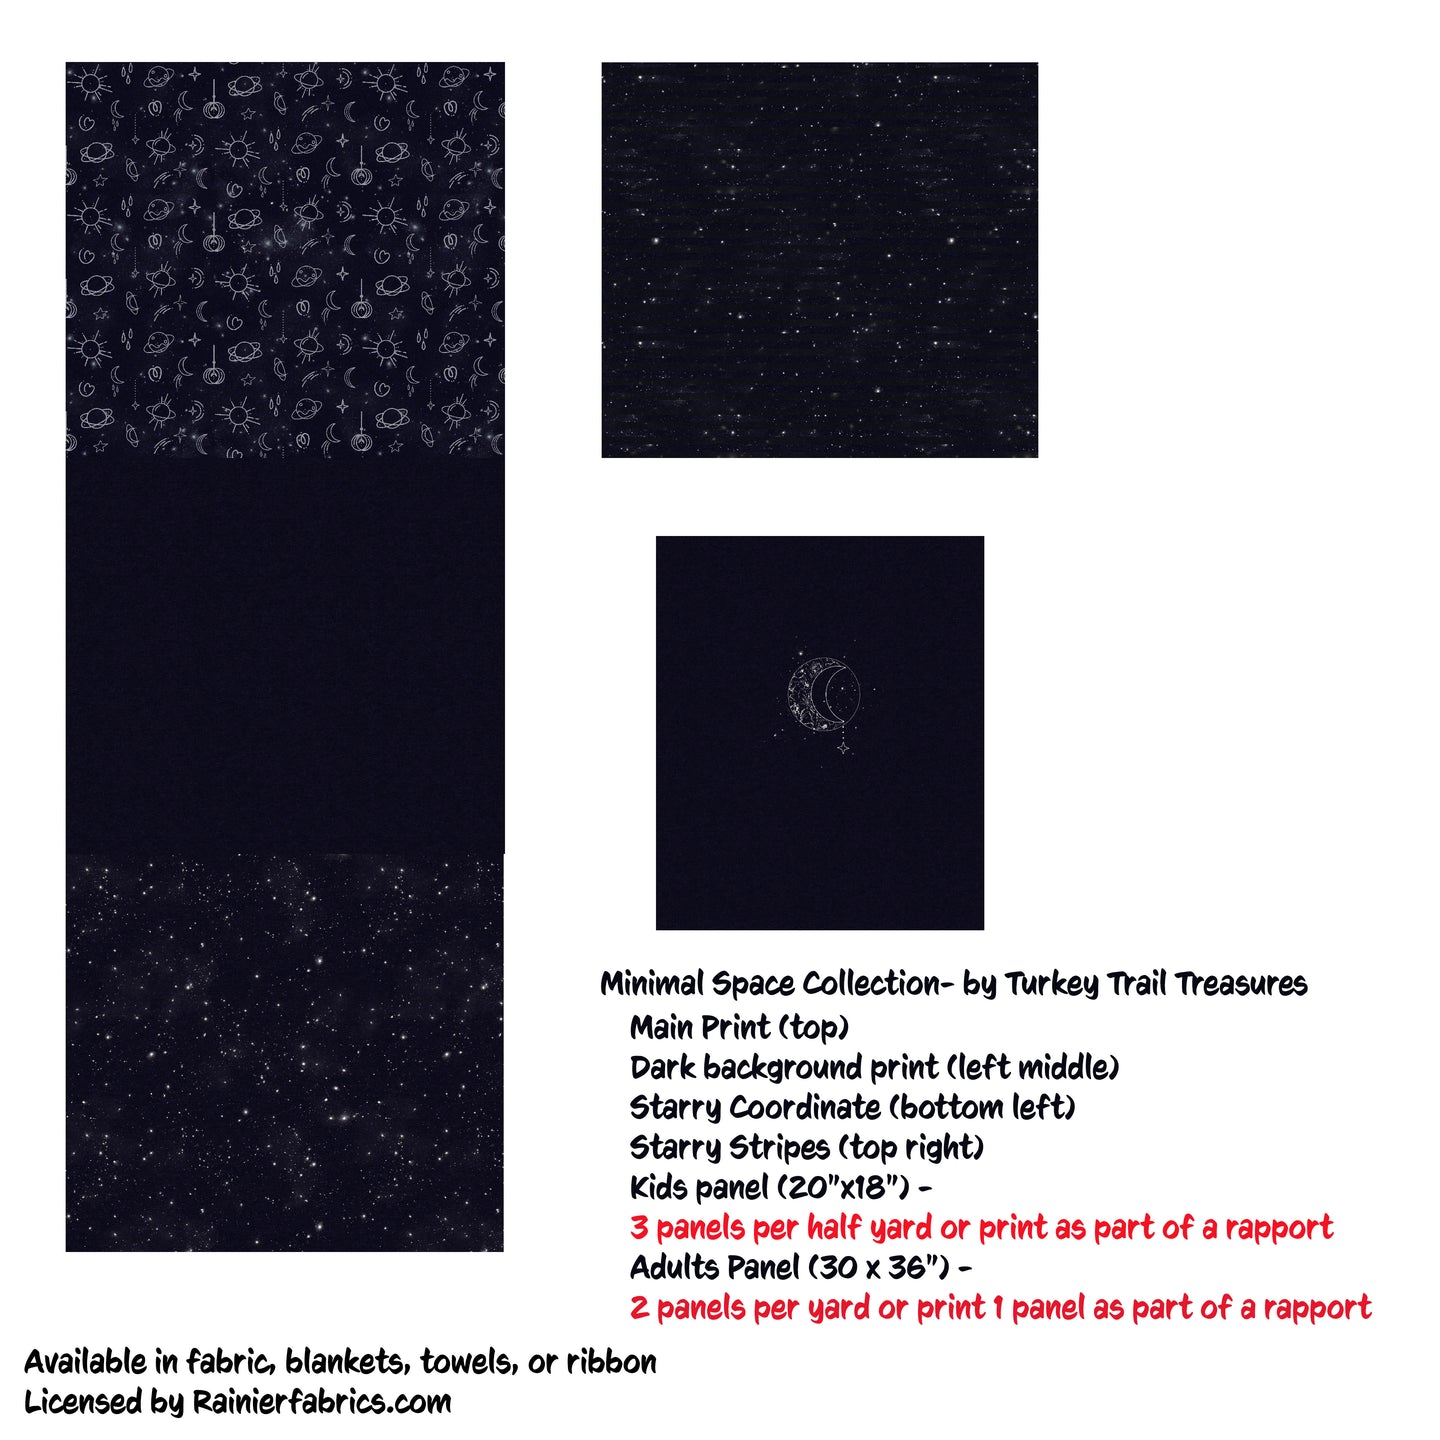 Minimal Space Collection-  from Turkey Trail Treasures - 2-5 day turnaround - Order by 1/2 yard; Description of bases below